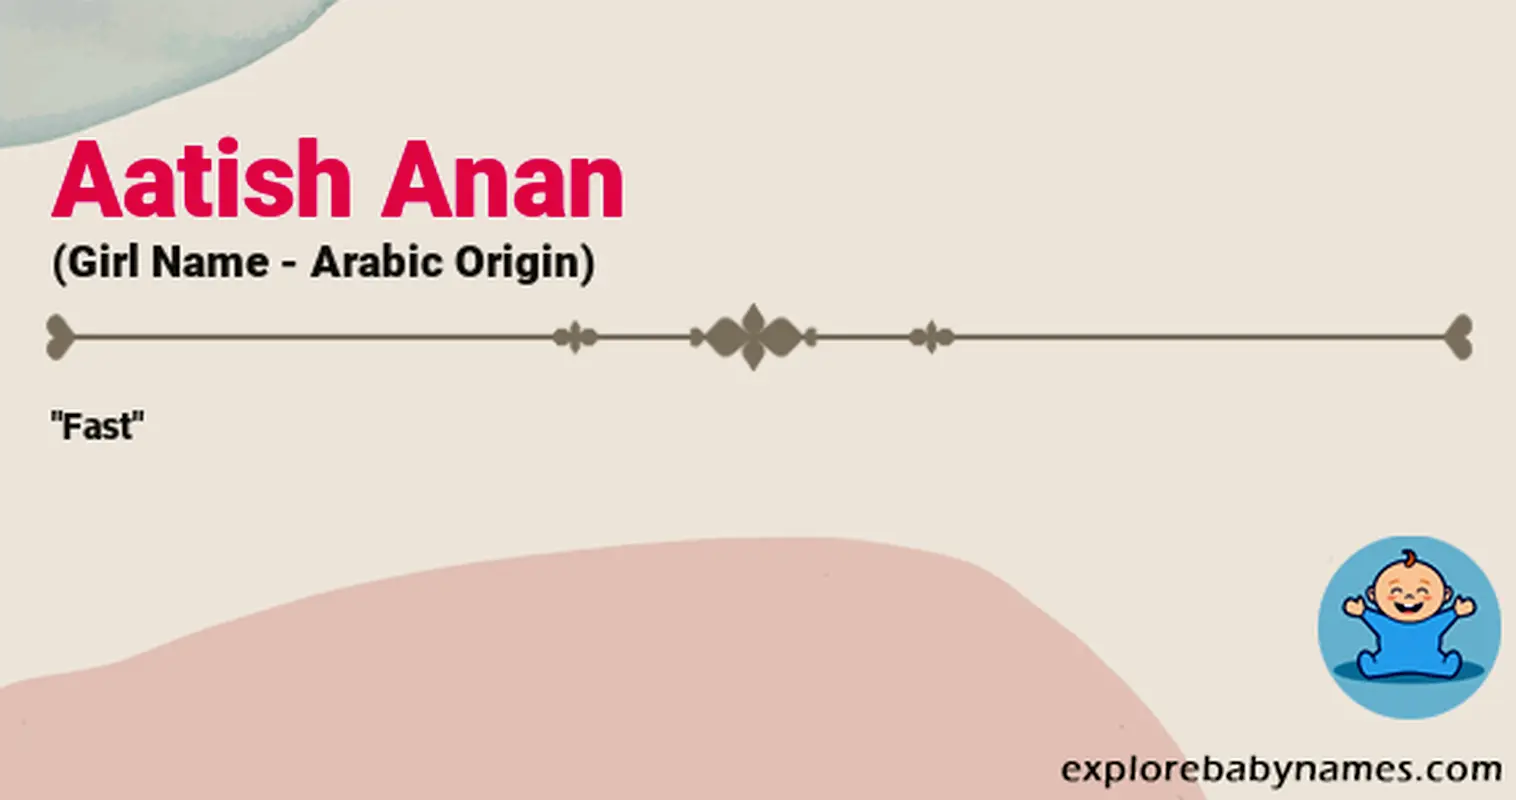 Meaning of Aatish Anan